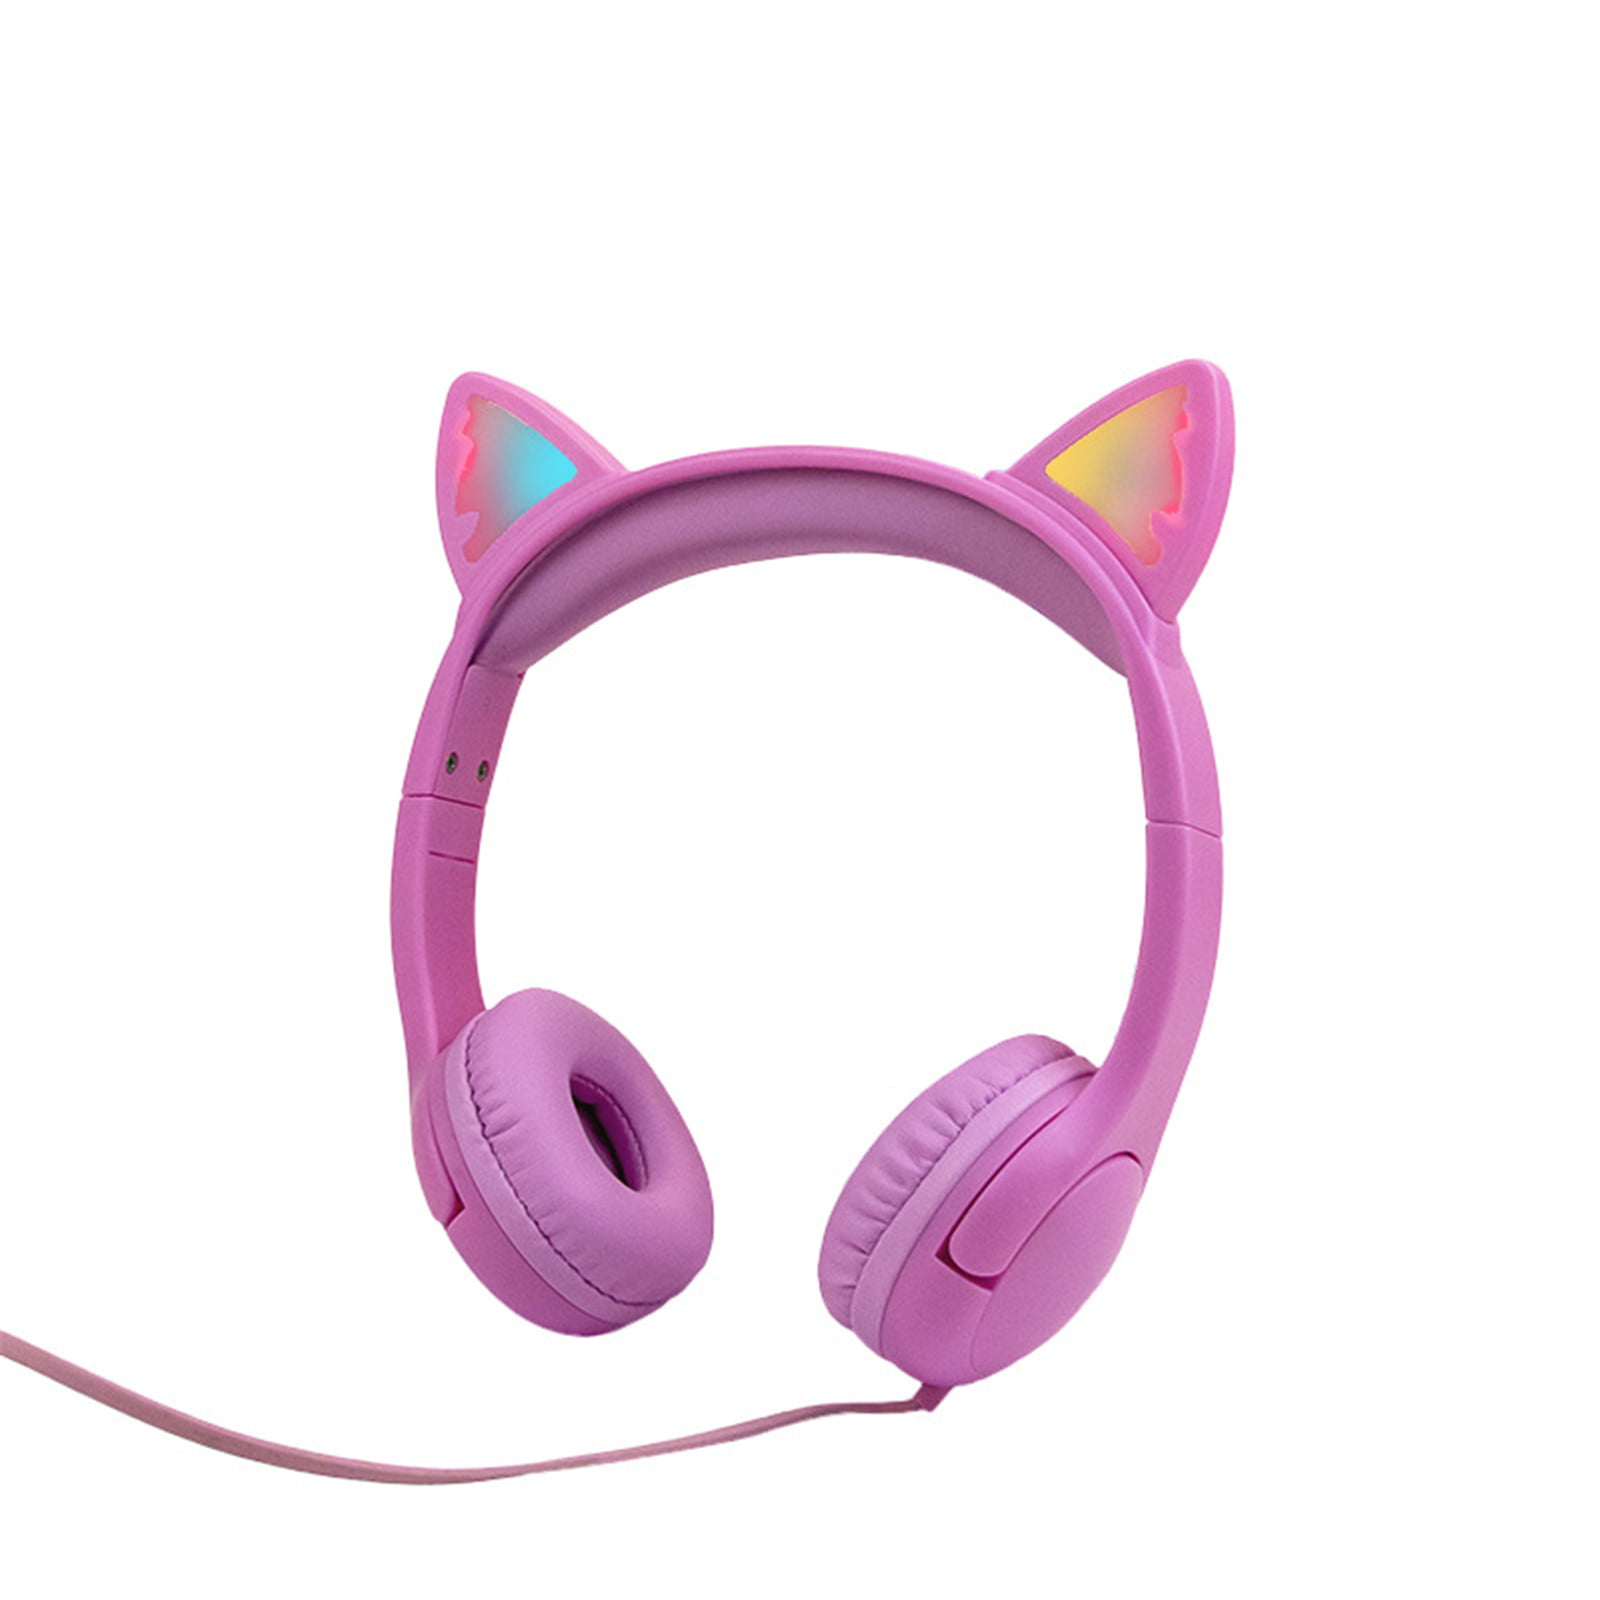 Max 85dB Hot Pink/Purple FosPower Kids Headphones with LED Light Up Cat Ears 3.5mm On Ear Audio Headphones for Kids with Laced Tangle Free Cable